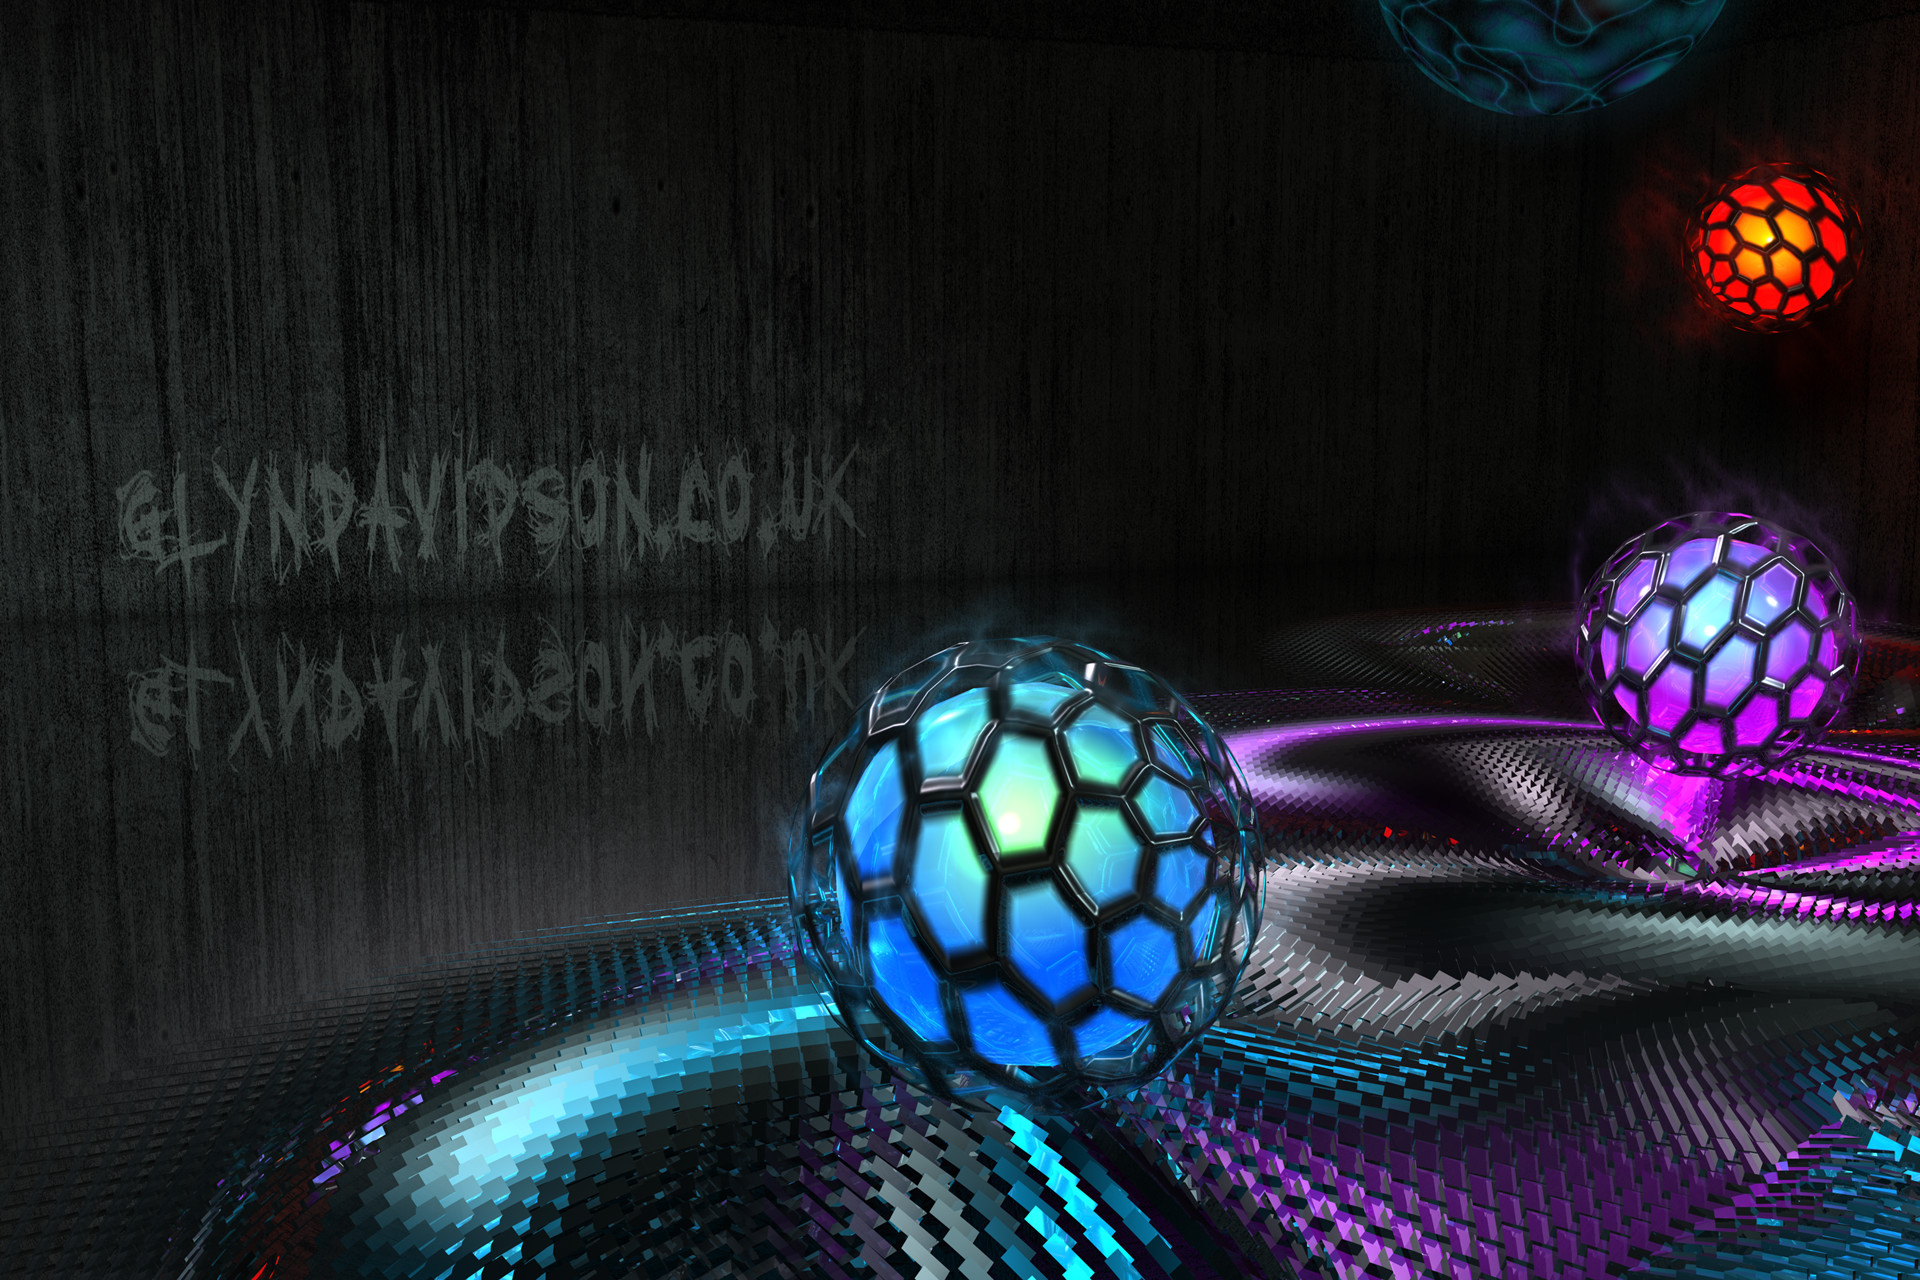 1920x1280 Cinema 4D Mograph wallpaper by TheRealGlyph Cinema 4D Mograph wallpaper by  TheRealGlyph